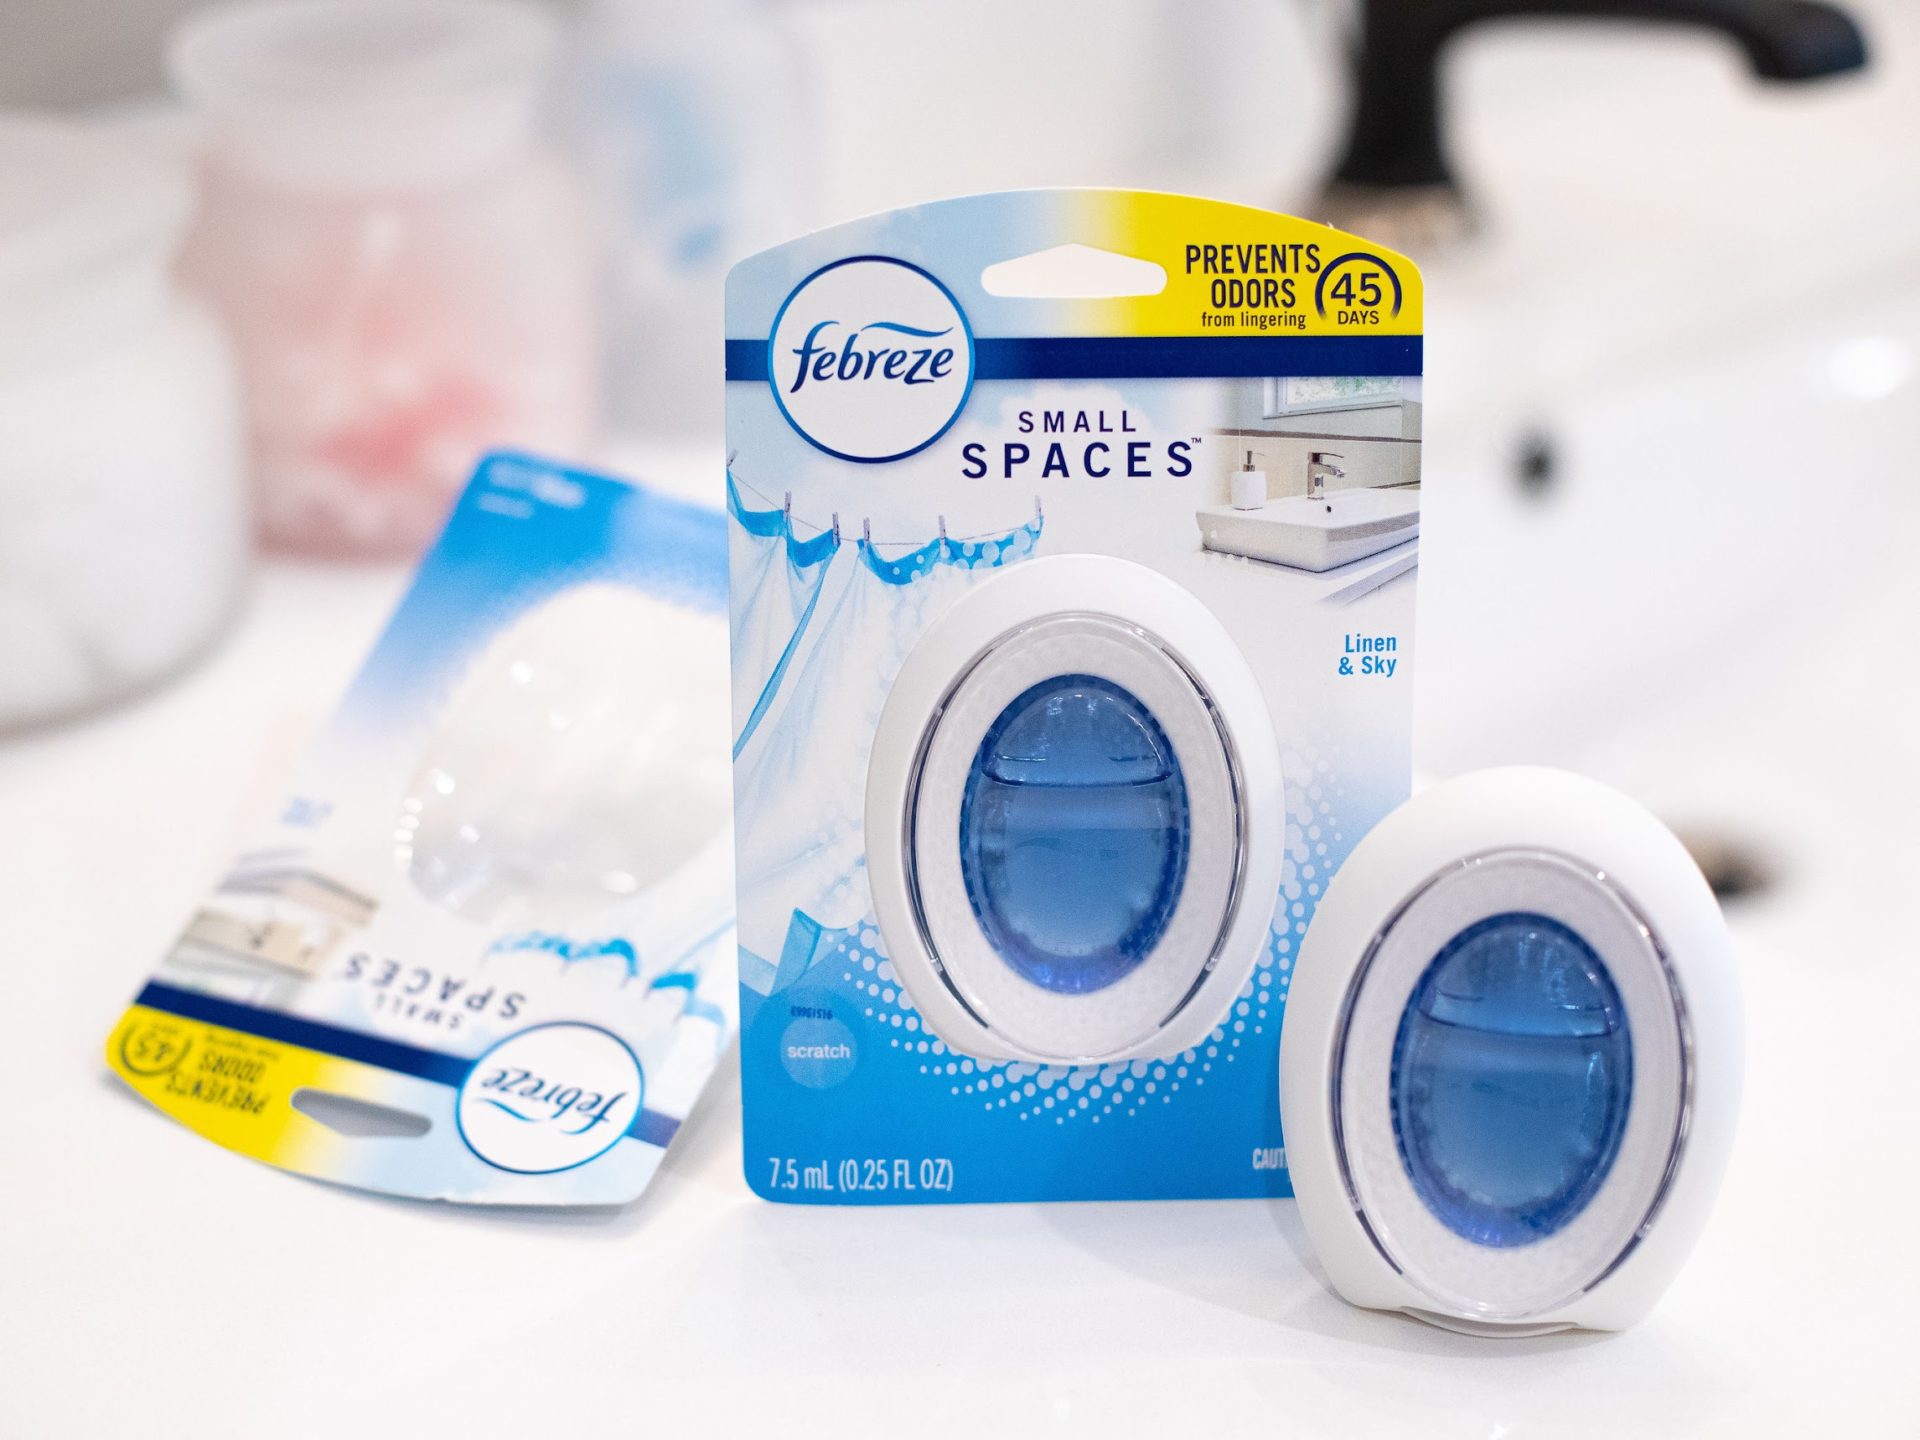 Febreze Small Spaces Or Air Effects Products As Low As $1.25 At Kroger